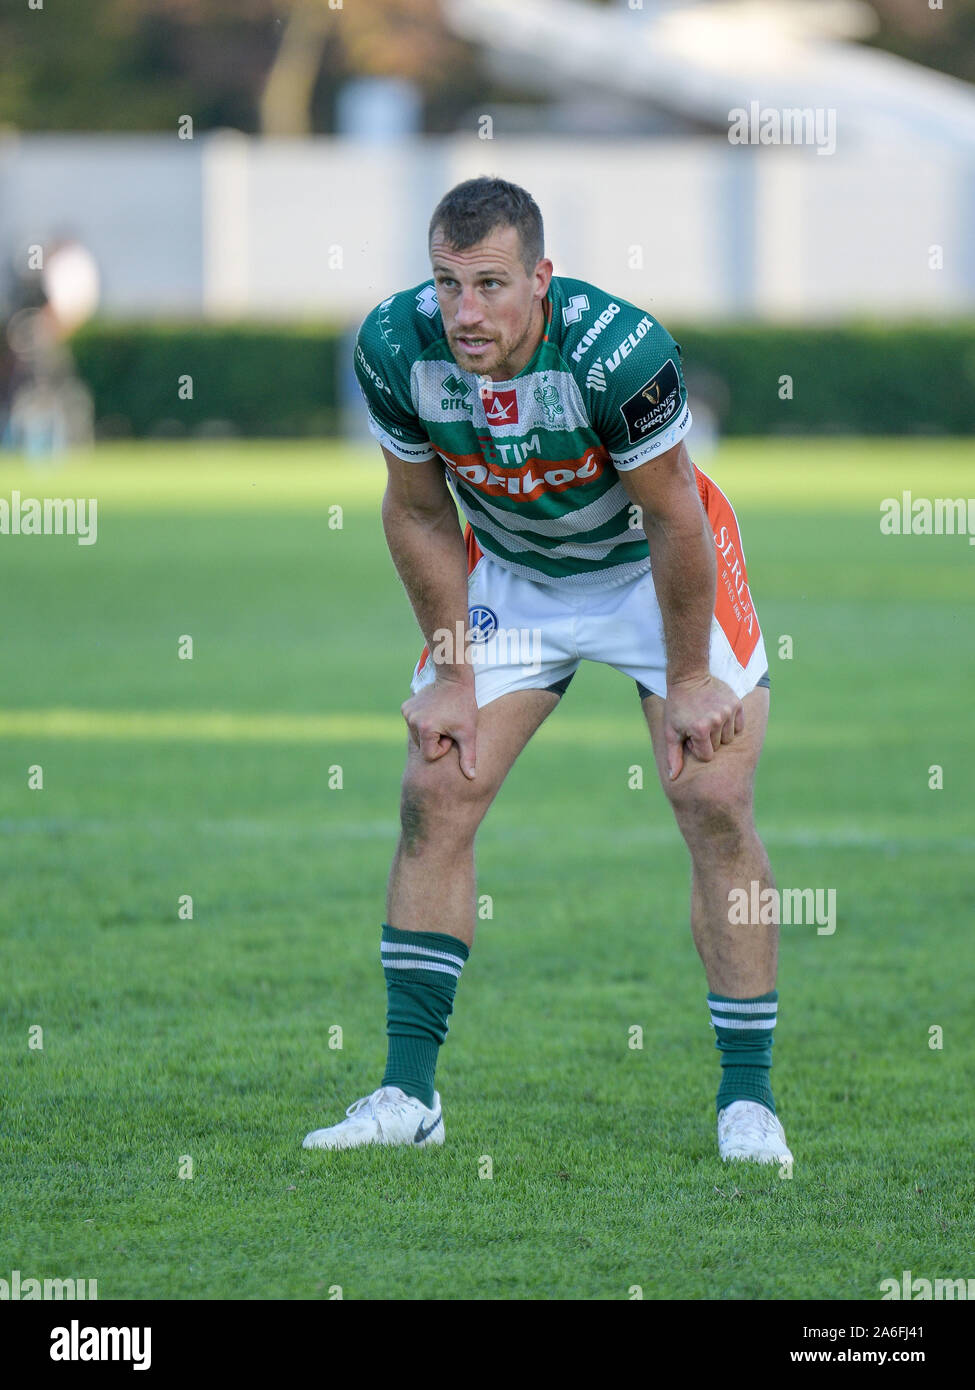 Treviso, Italy. 26th Oct, 2019. alberto sgarbi (benetton treviso)during  Benetton Treviso vs Isuzu Southern Kings, Rugby Guinness Pro 14 in Treviso,  Italy, October 26 2019 - LPS/Ettore Griffoni Credit: Ettore  Griffoni/LPS/ZUMA Wire/Alamy